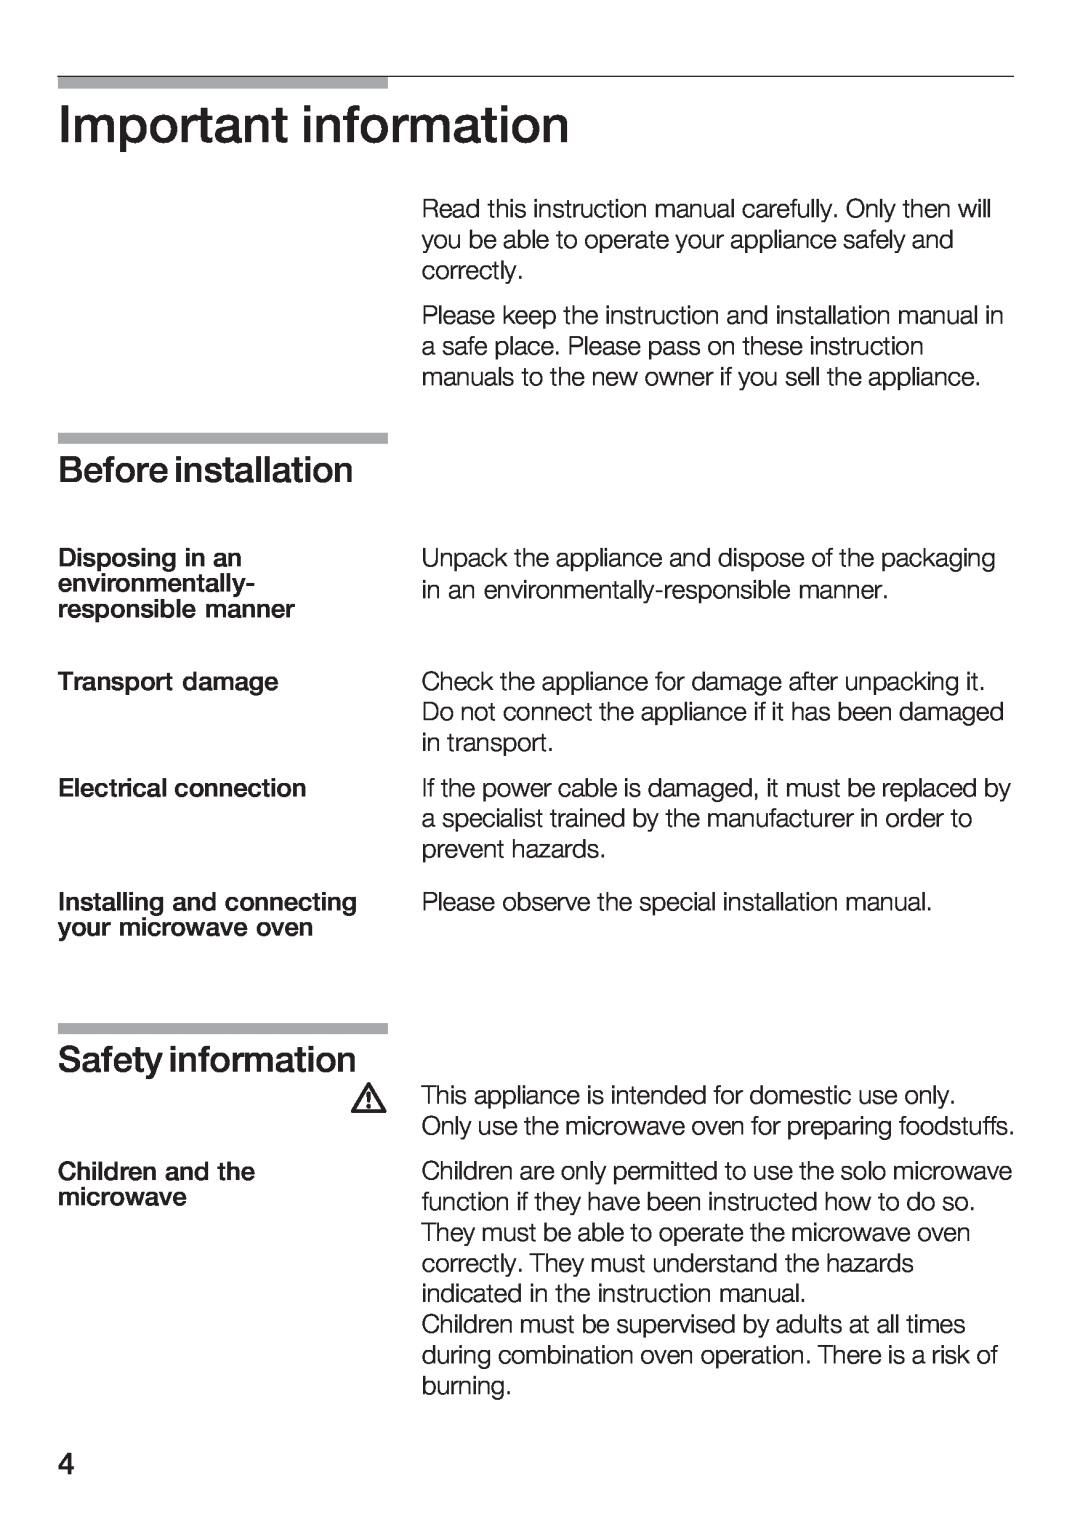 Bosch Appliances HBC84K5.0A manual Important information, Before installation, Safety information 